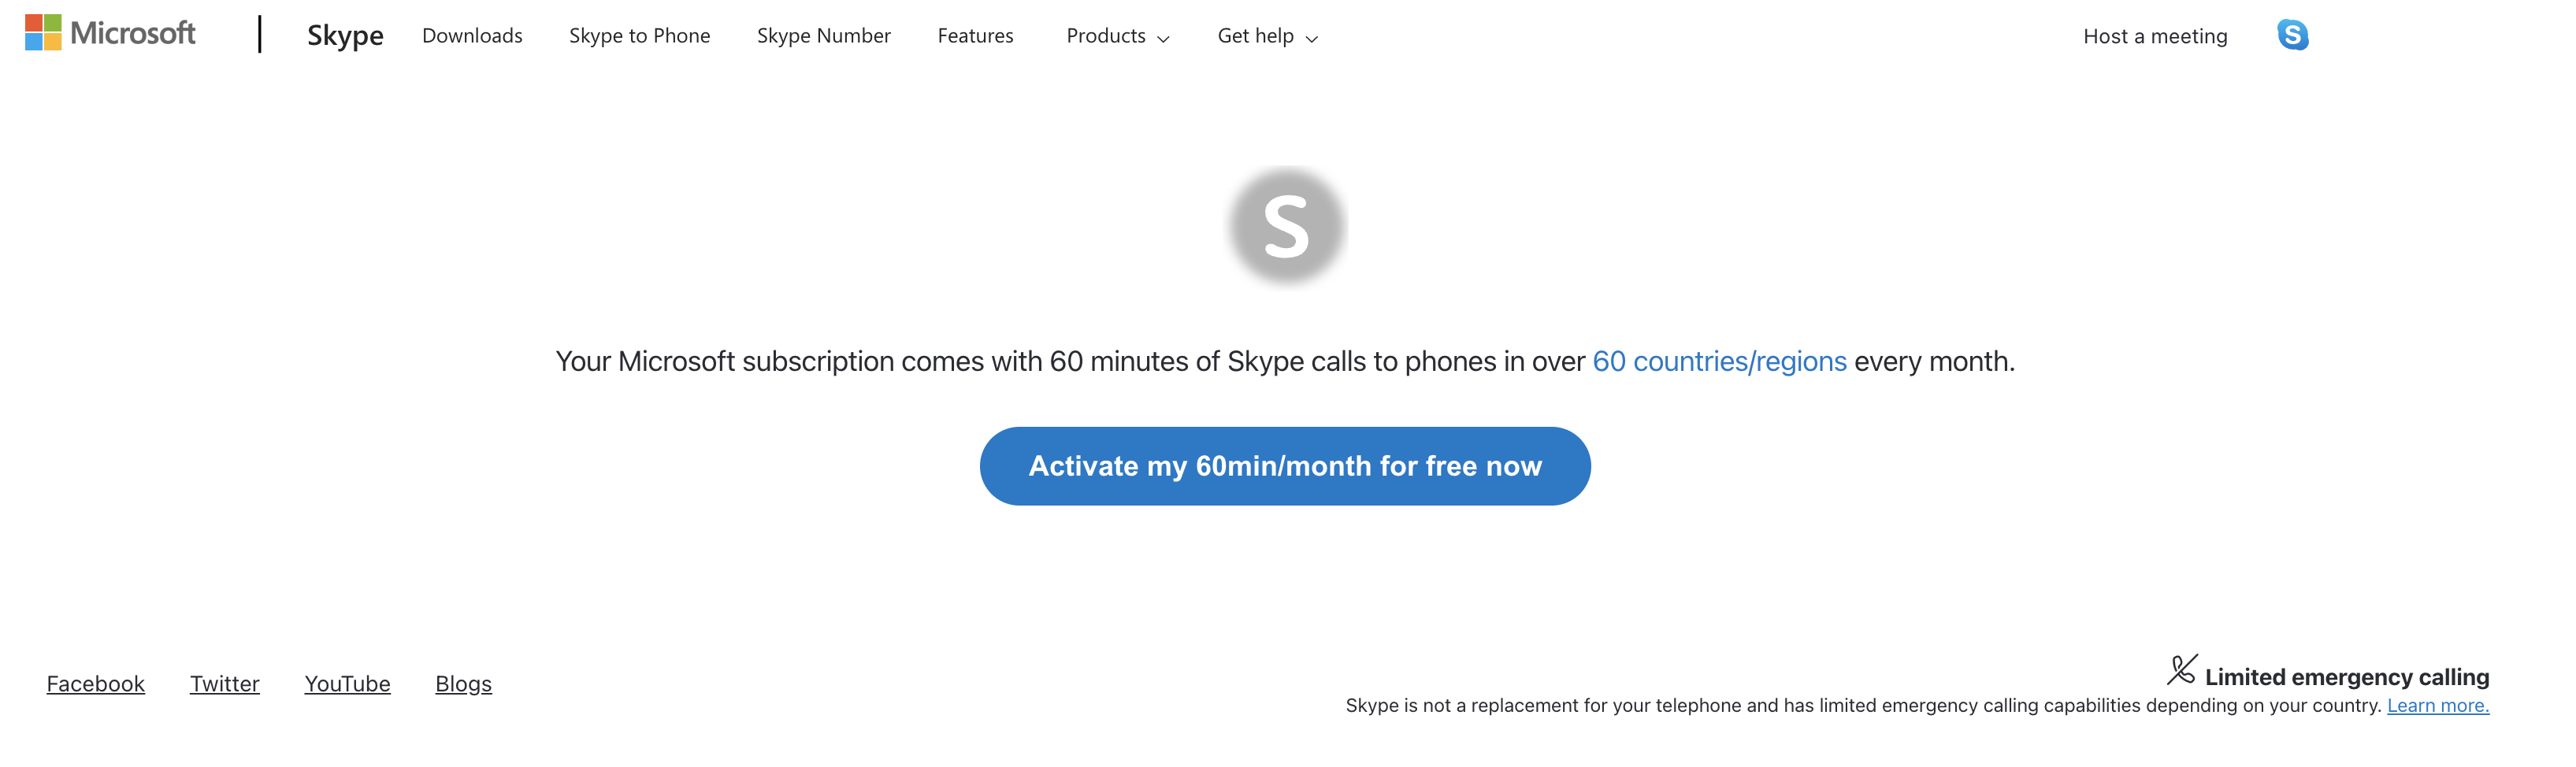 Web page to activate free 60 minutes with Skype